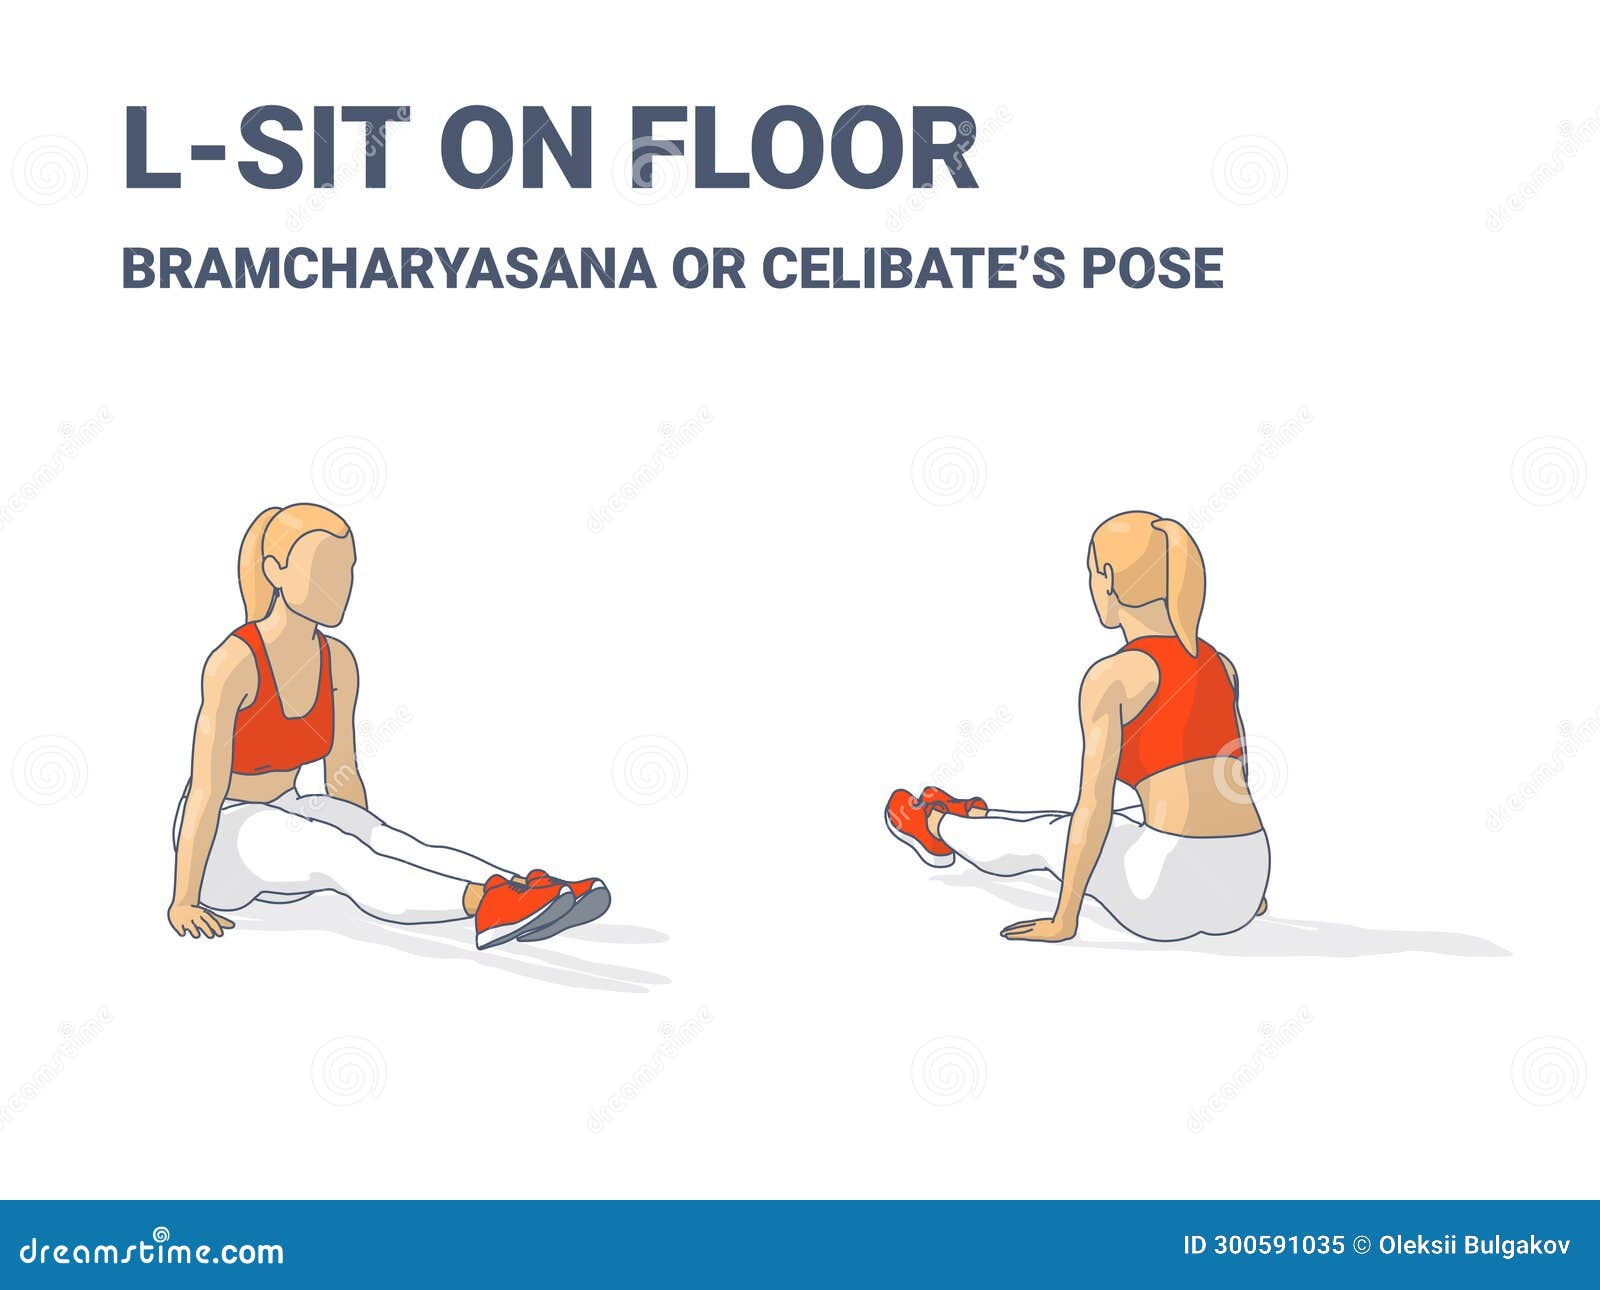 What is Brahmacharyasana? - Definition from Yogapedia | Abs workout,  Exercise, Cardio workout